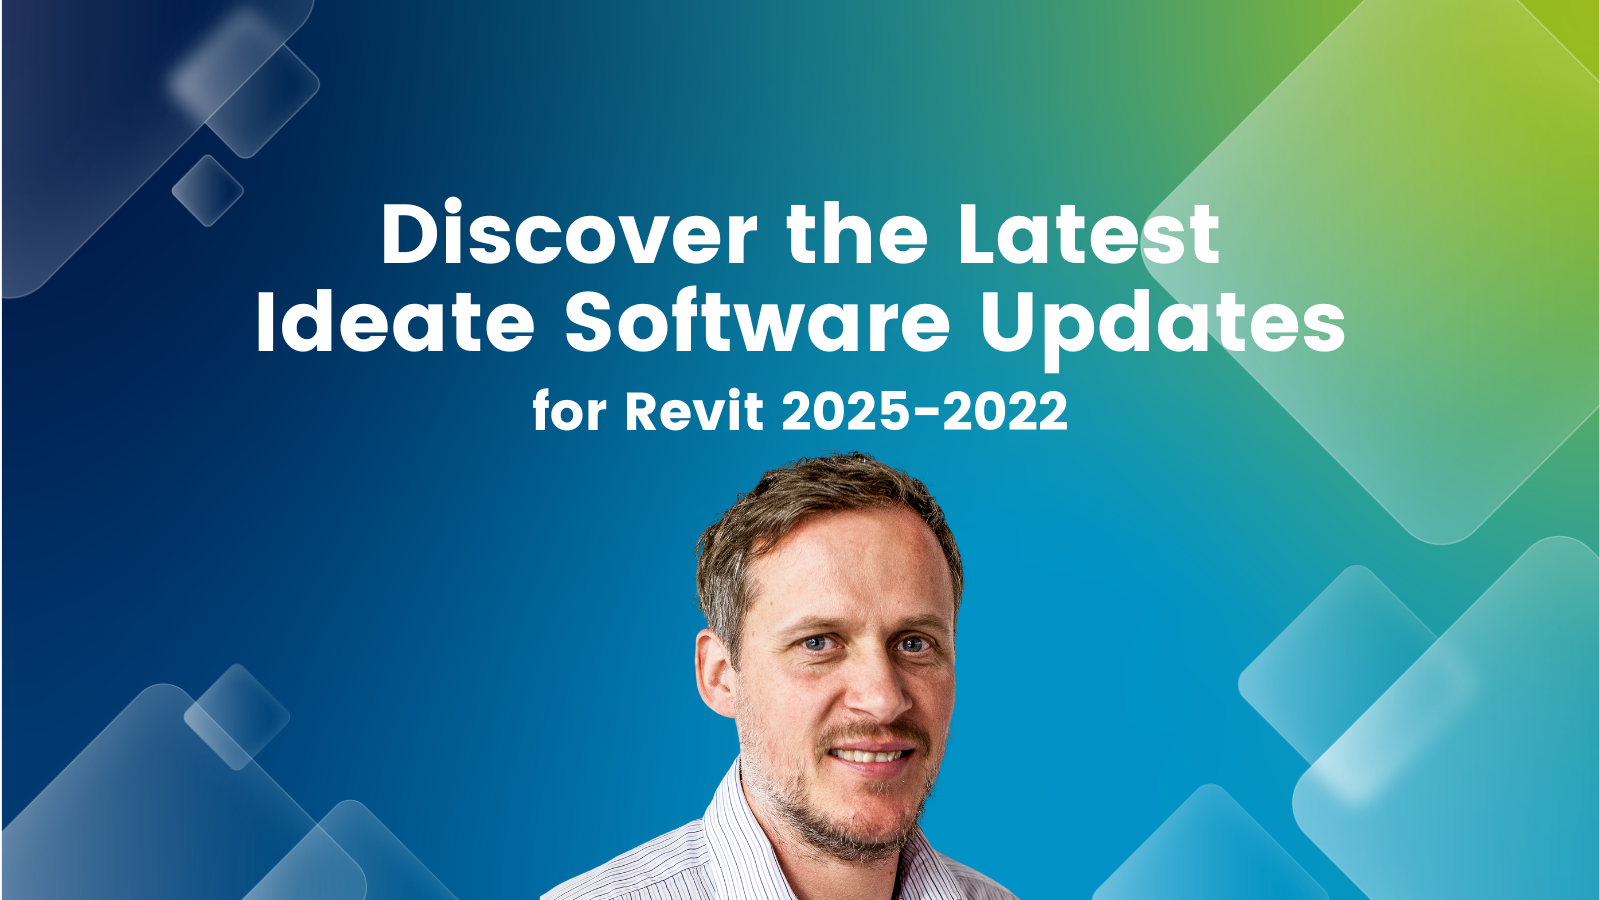 Exploring Ideate Software Updates for Revit 2025-2022